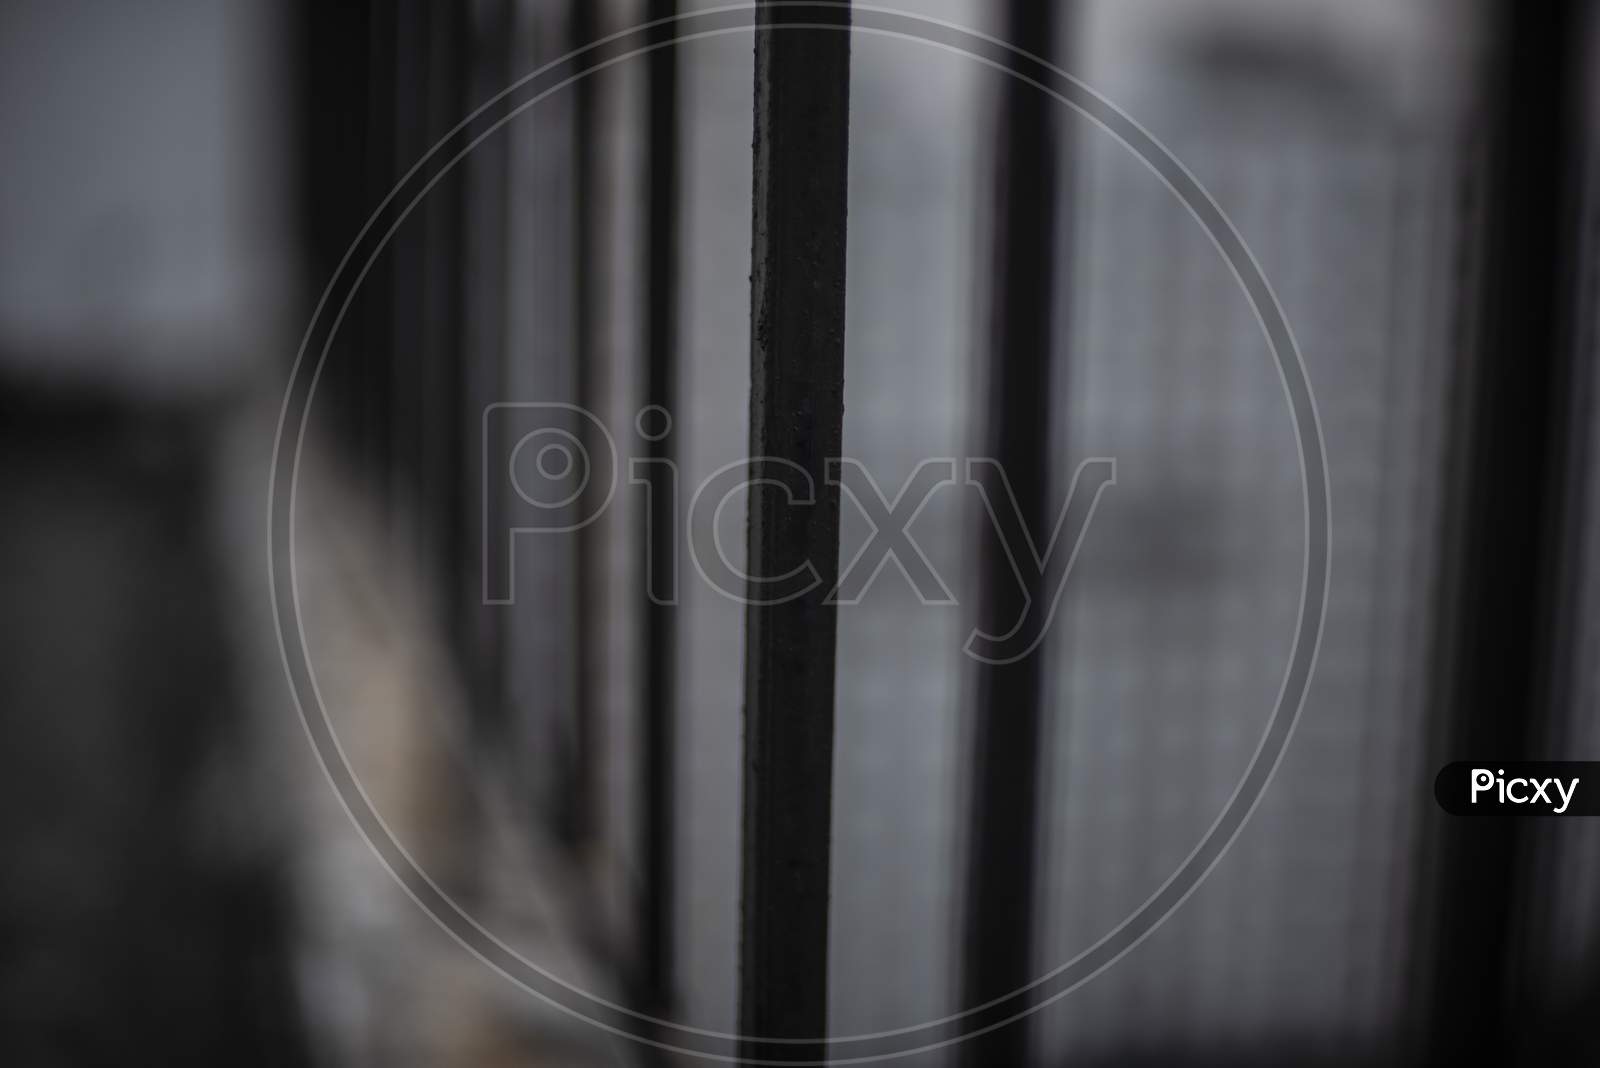 Grills/railings of a rooftop/balcony in cloudy sky background.